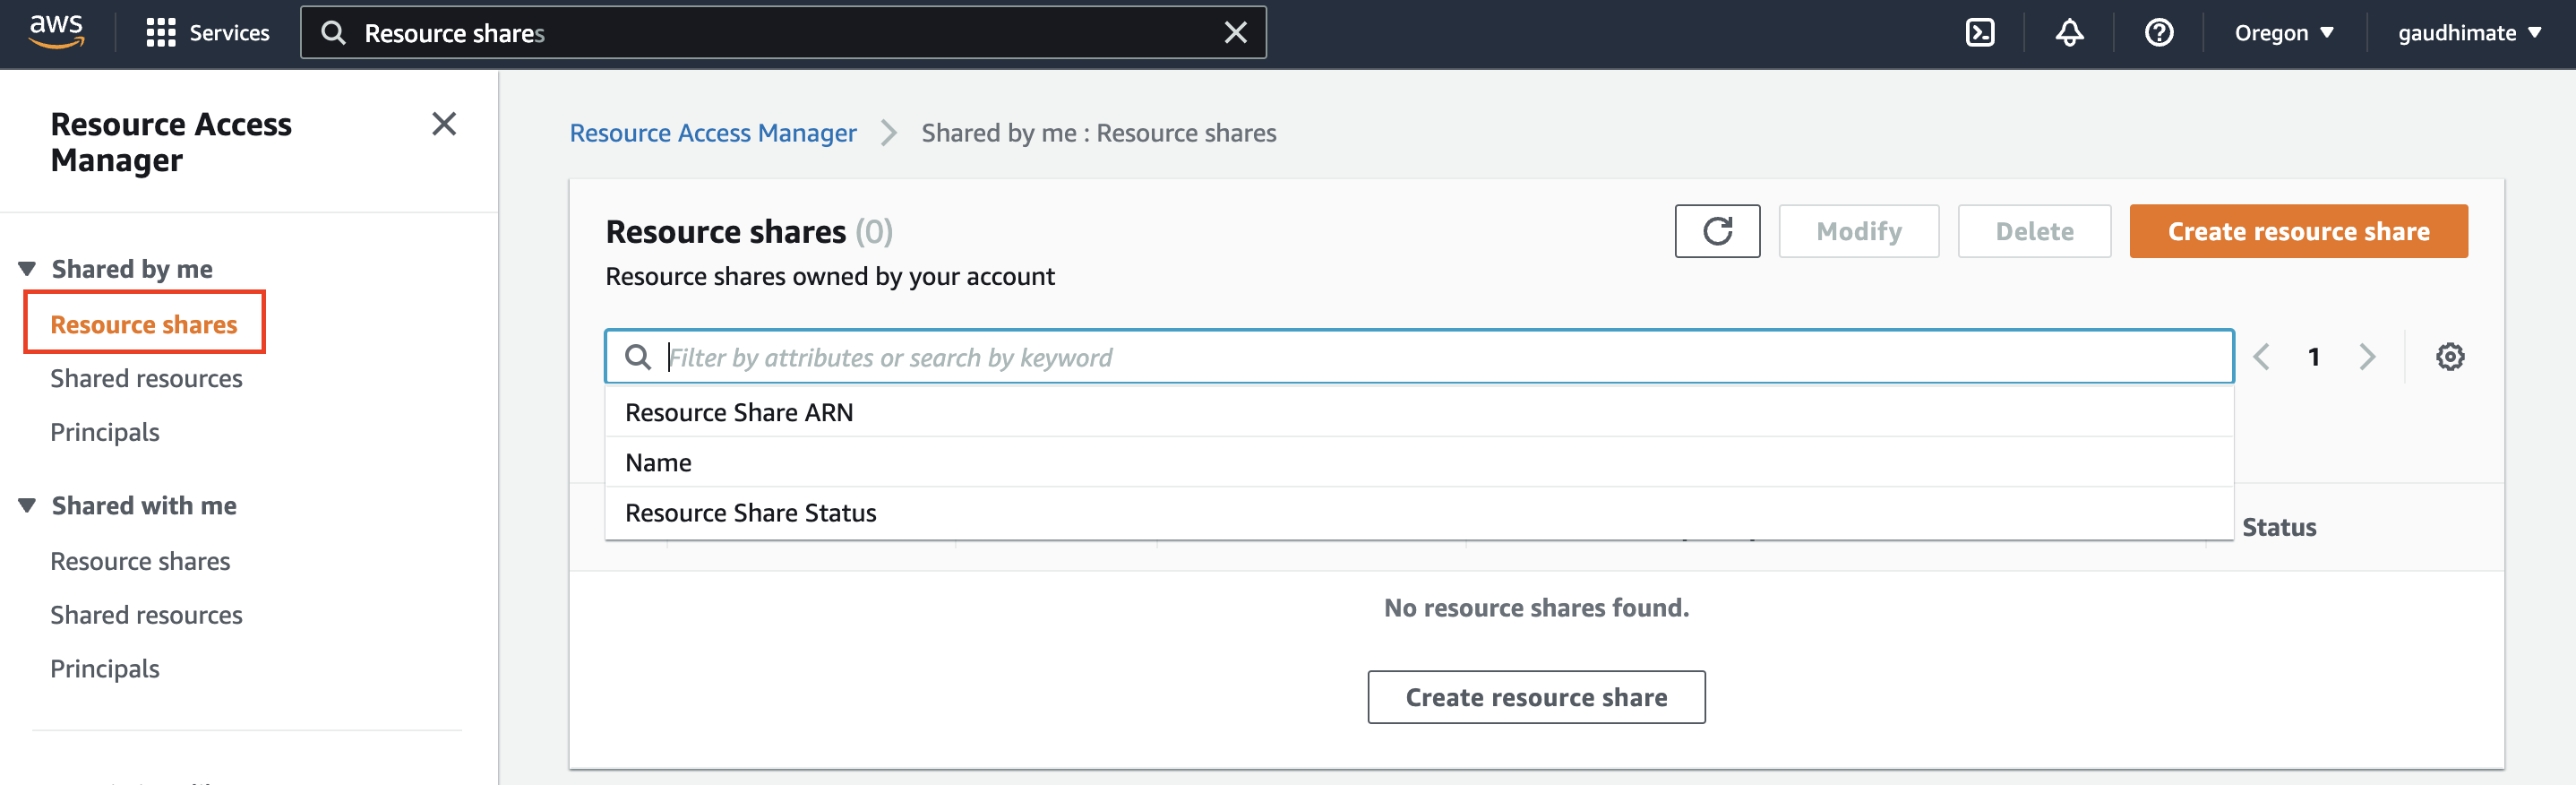 Search for "Resource access manager" and go to Resource Shares -> Create resource share.